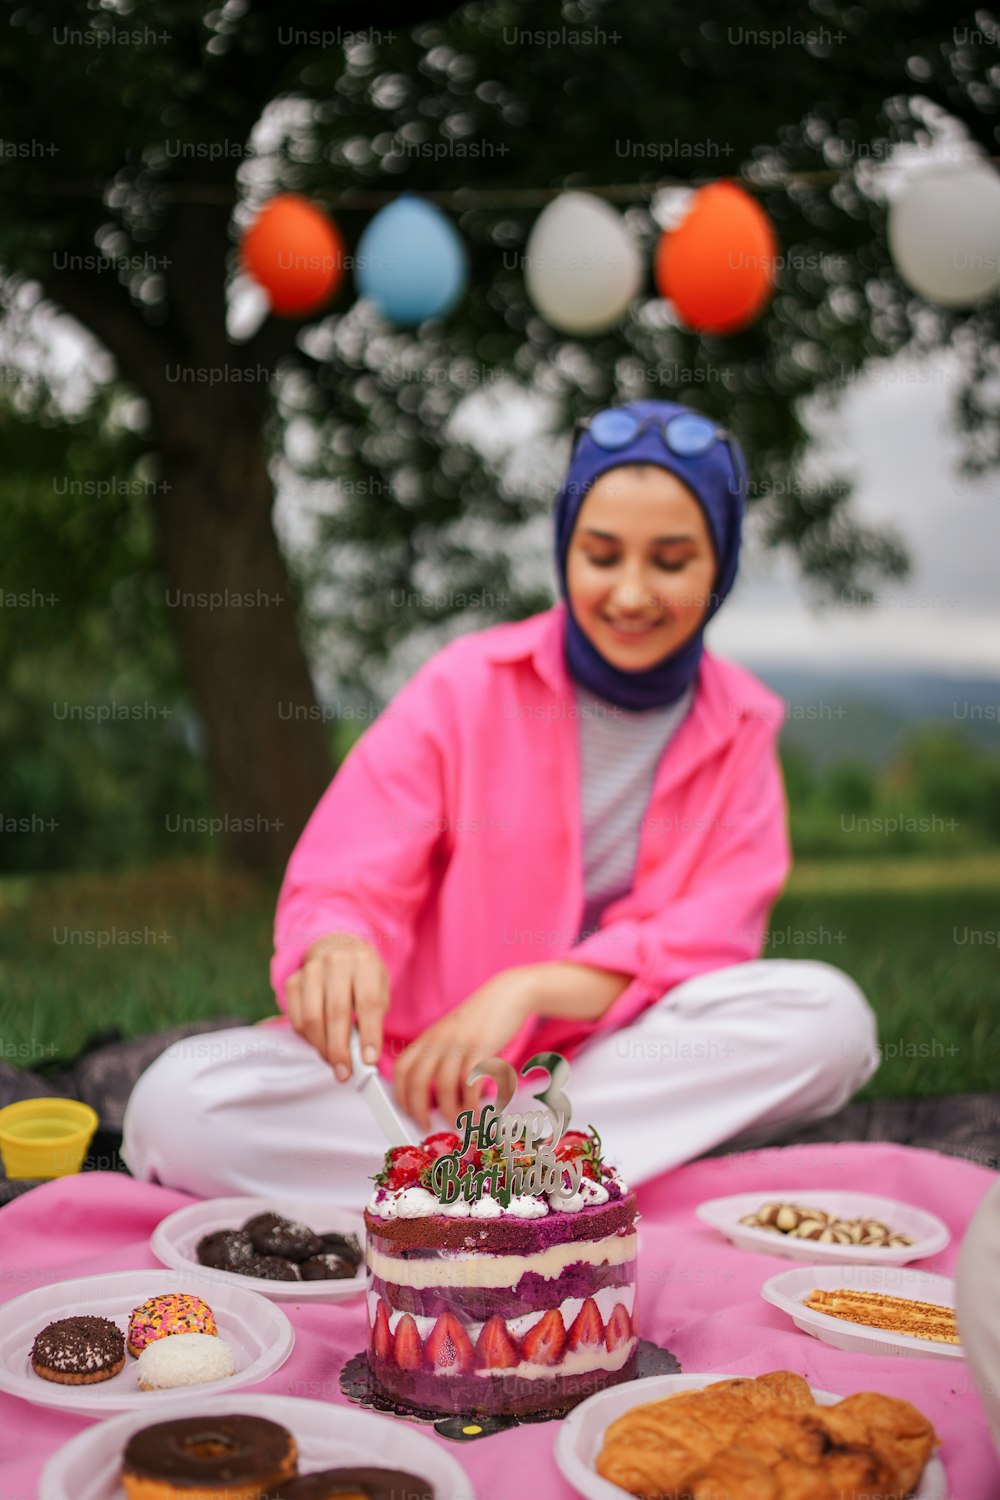 a woman sitting on the ground cutting a cake